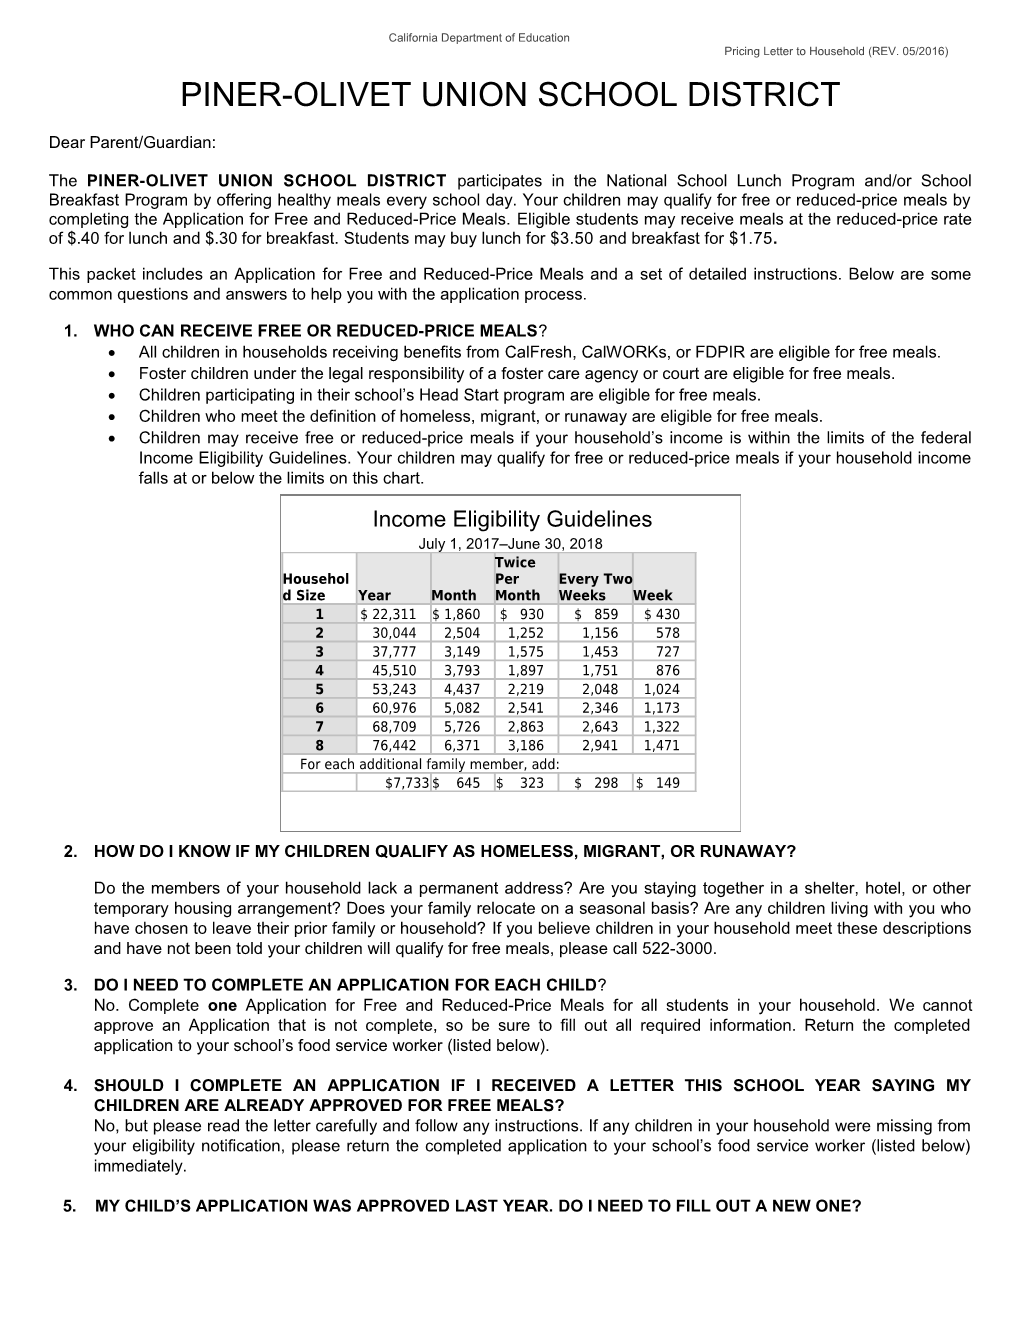 Pricing Letter - School Nutrition (CA Dept of Education)